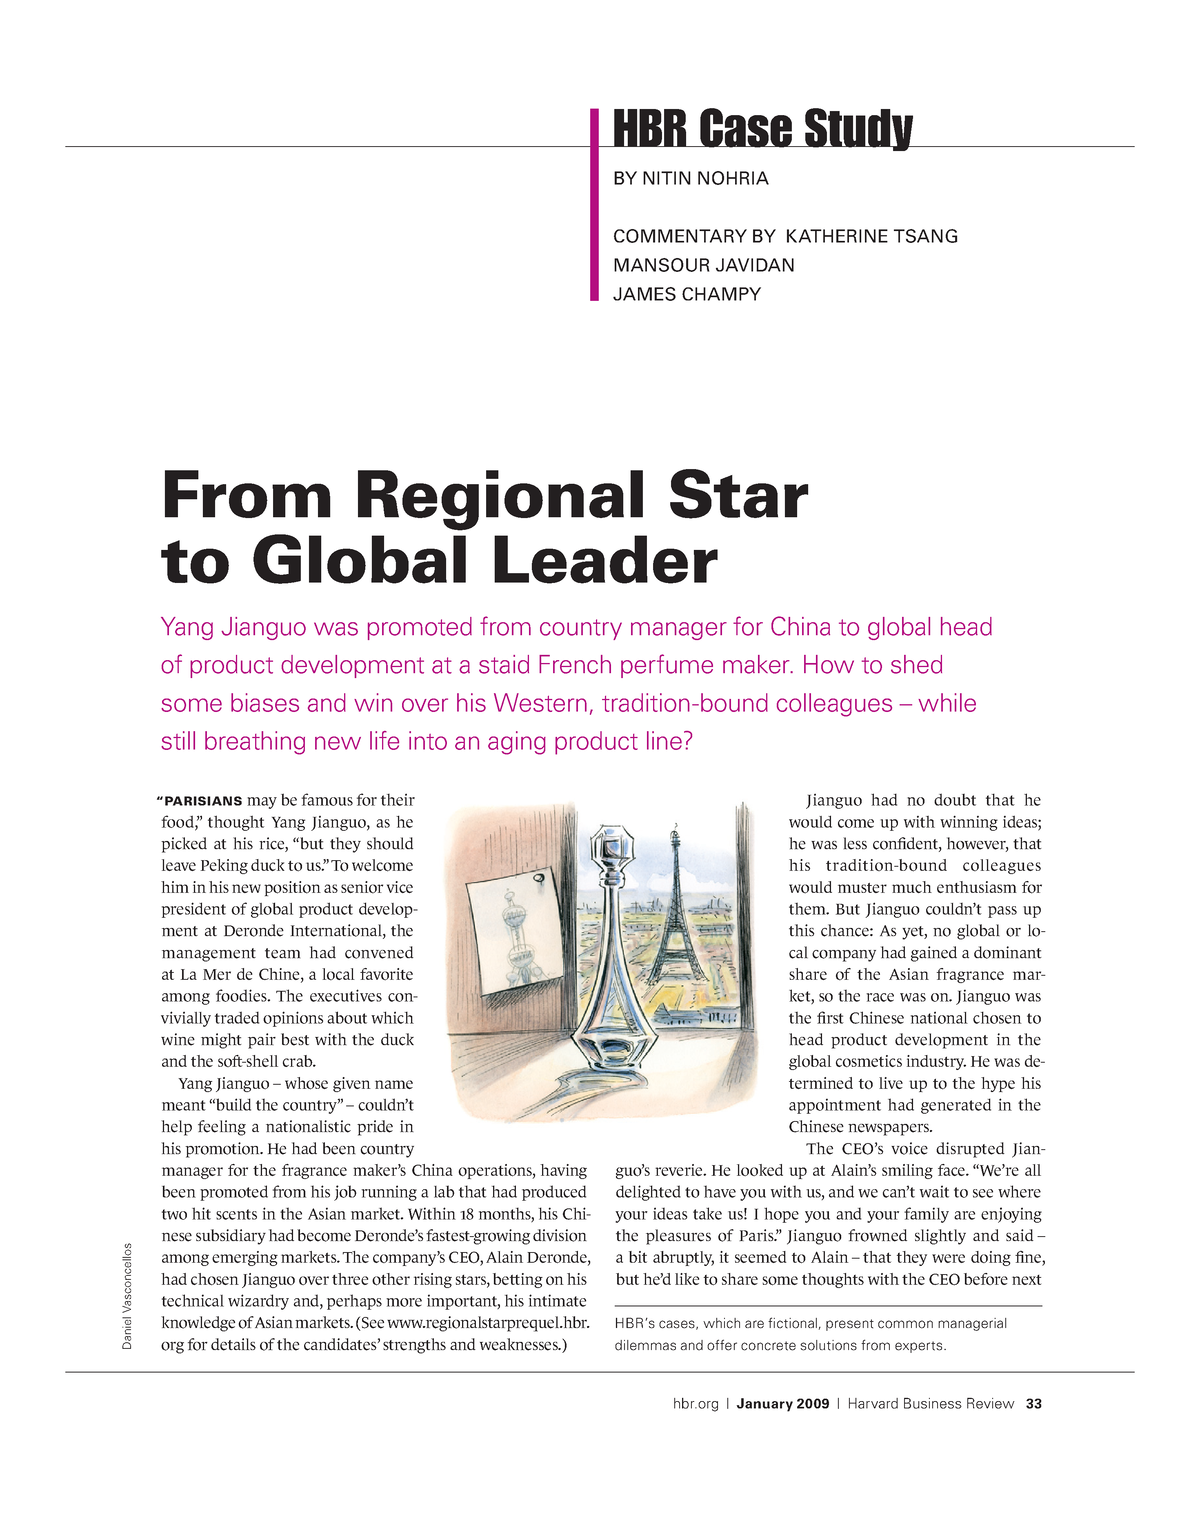 hbr case study from regional star to global leader